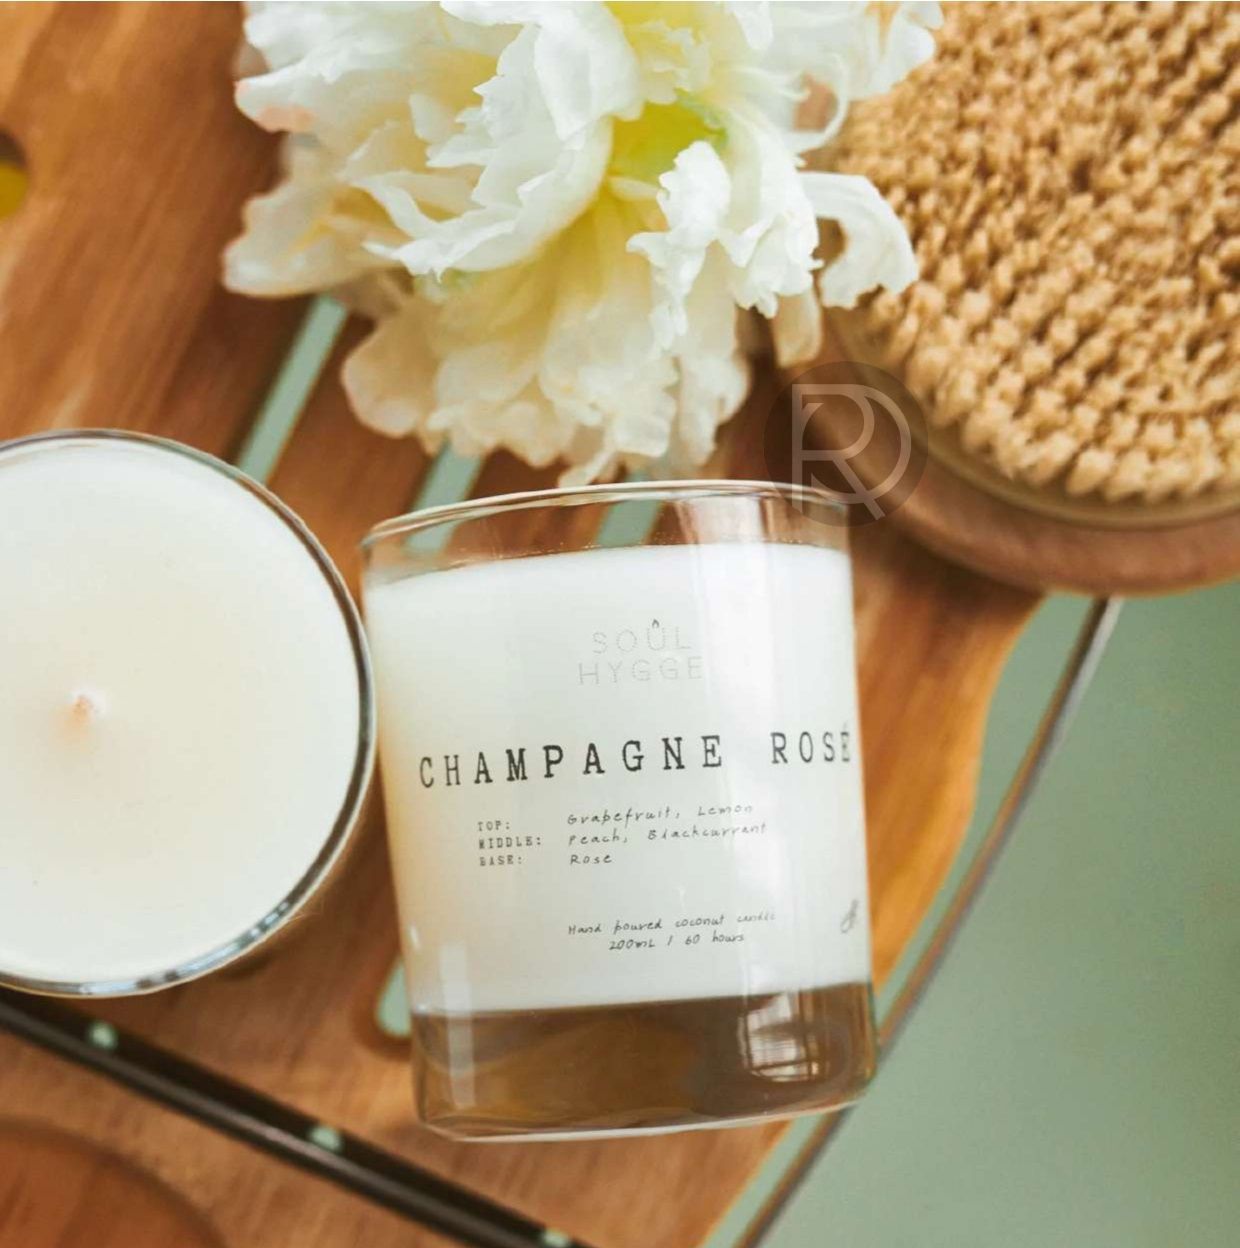 CHAMPAGNE ROSÉ scented candle by Romatti